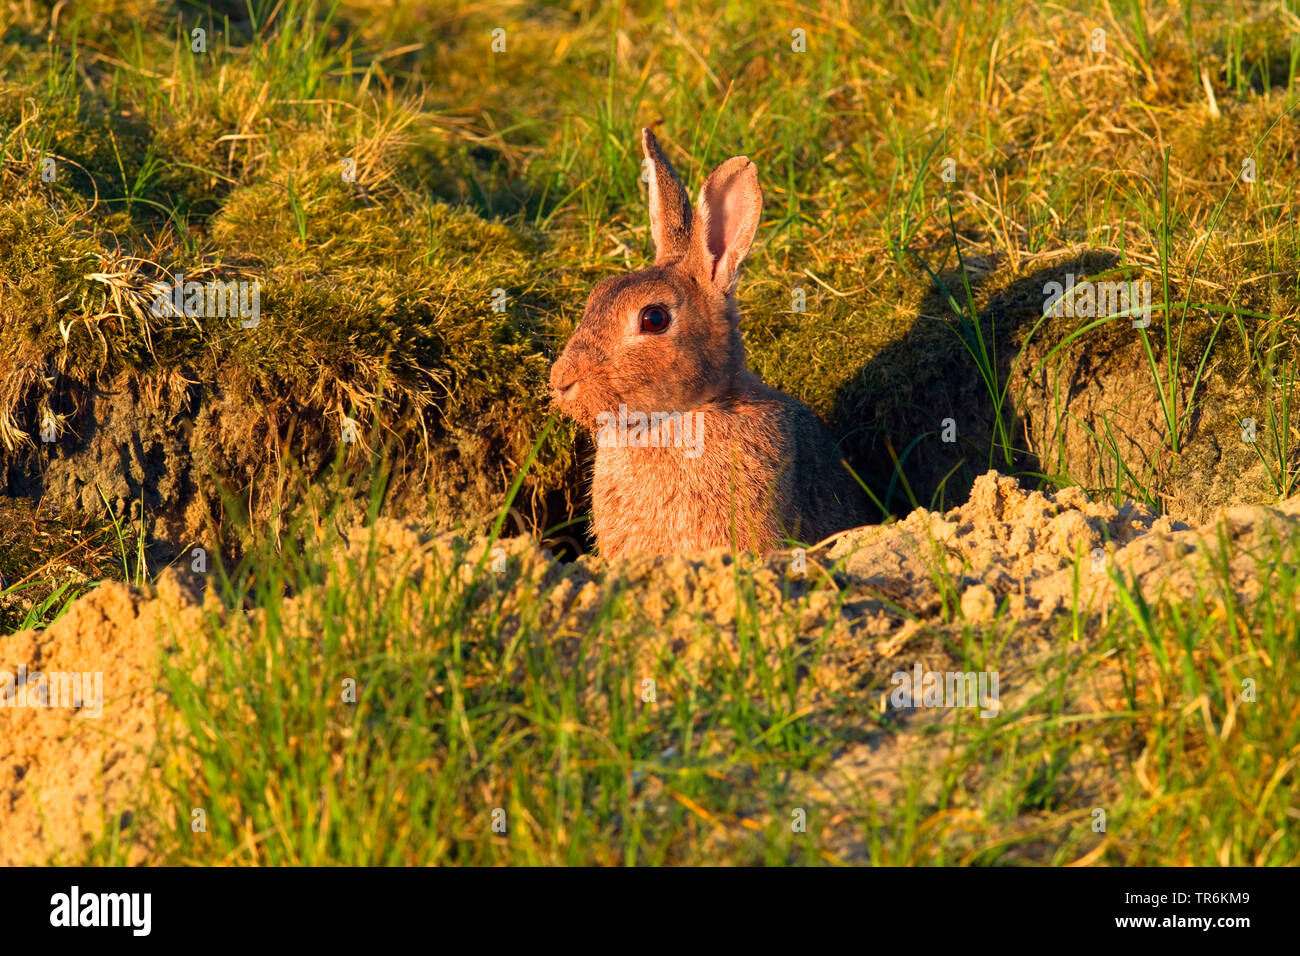 European rabbit (Oryctolagus cuniculus), peering from the den in a dune, Germany, Lower Saxony, Norderney Stock Photo